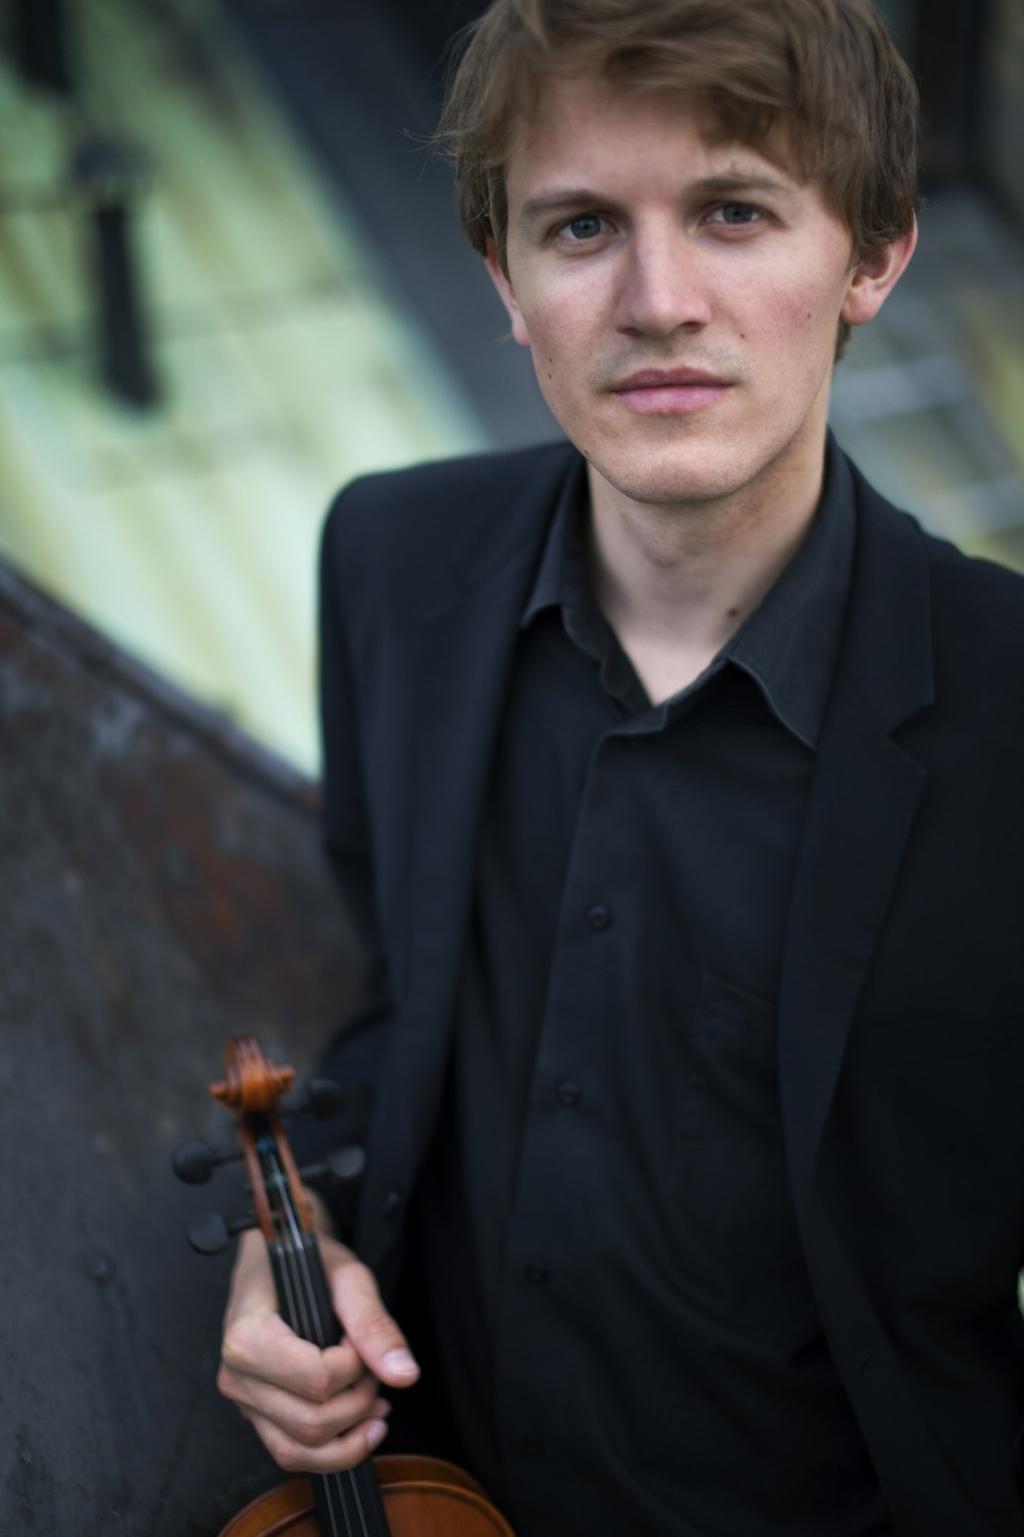 Anders Kjellberg Nilsson, born in Oslo in 1983, is today one of Norway's most active violinists.